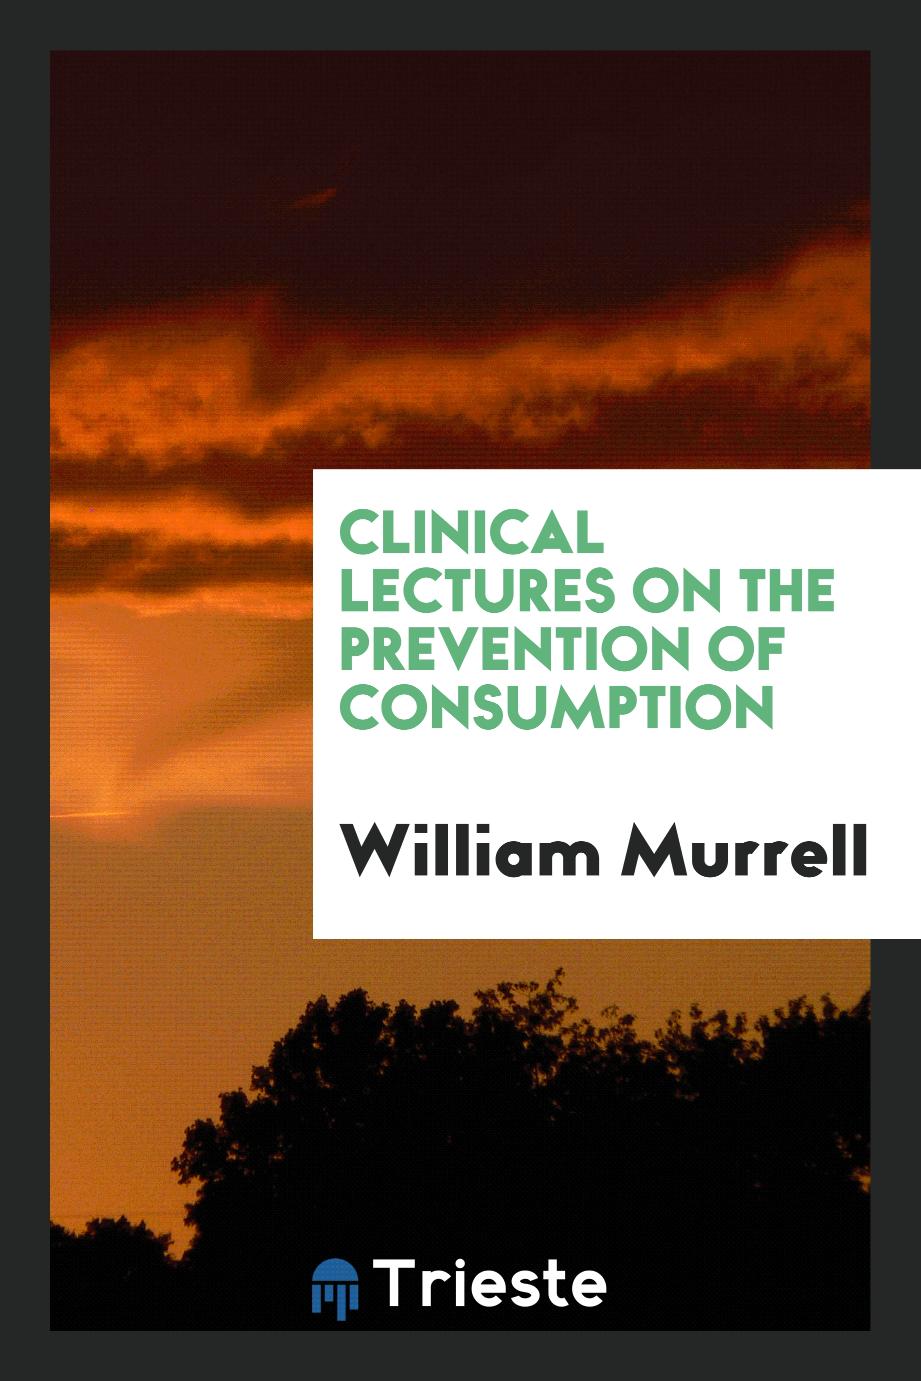 Clinical Lectures on the Prevention of Consumption